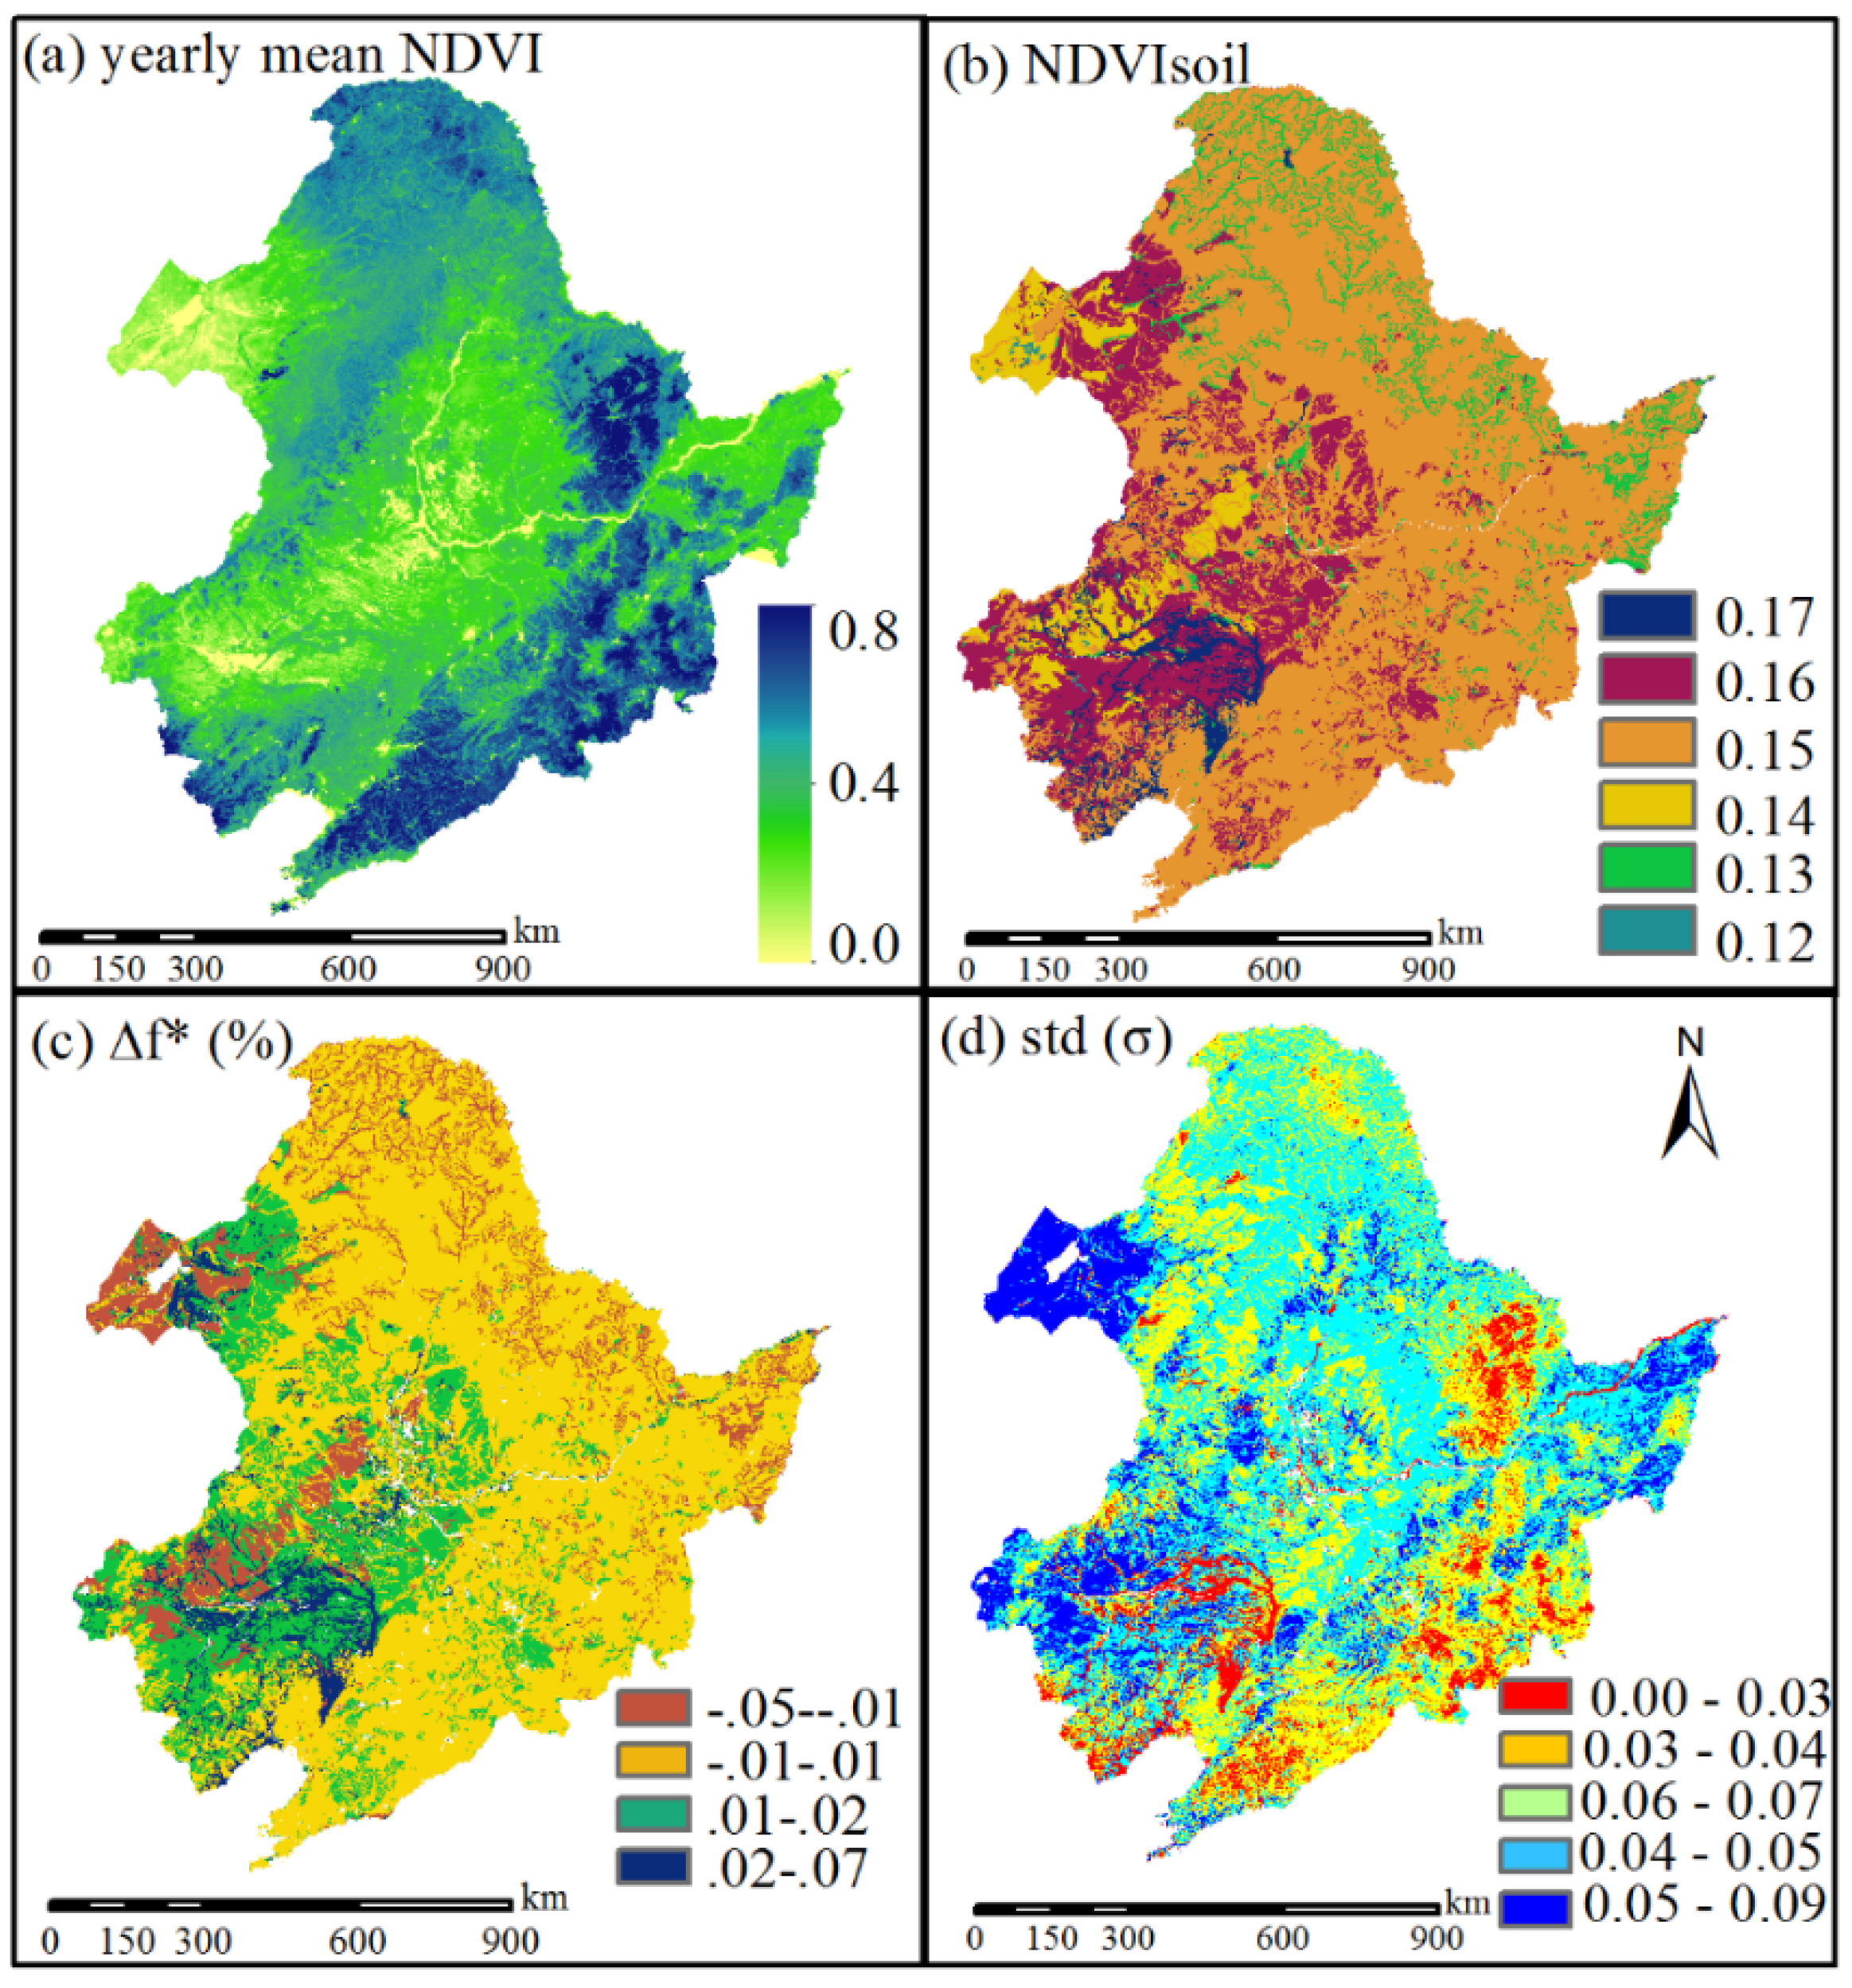 Relationship between selection and IRG (a), NDVI (b), shrub cover (c)